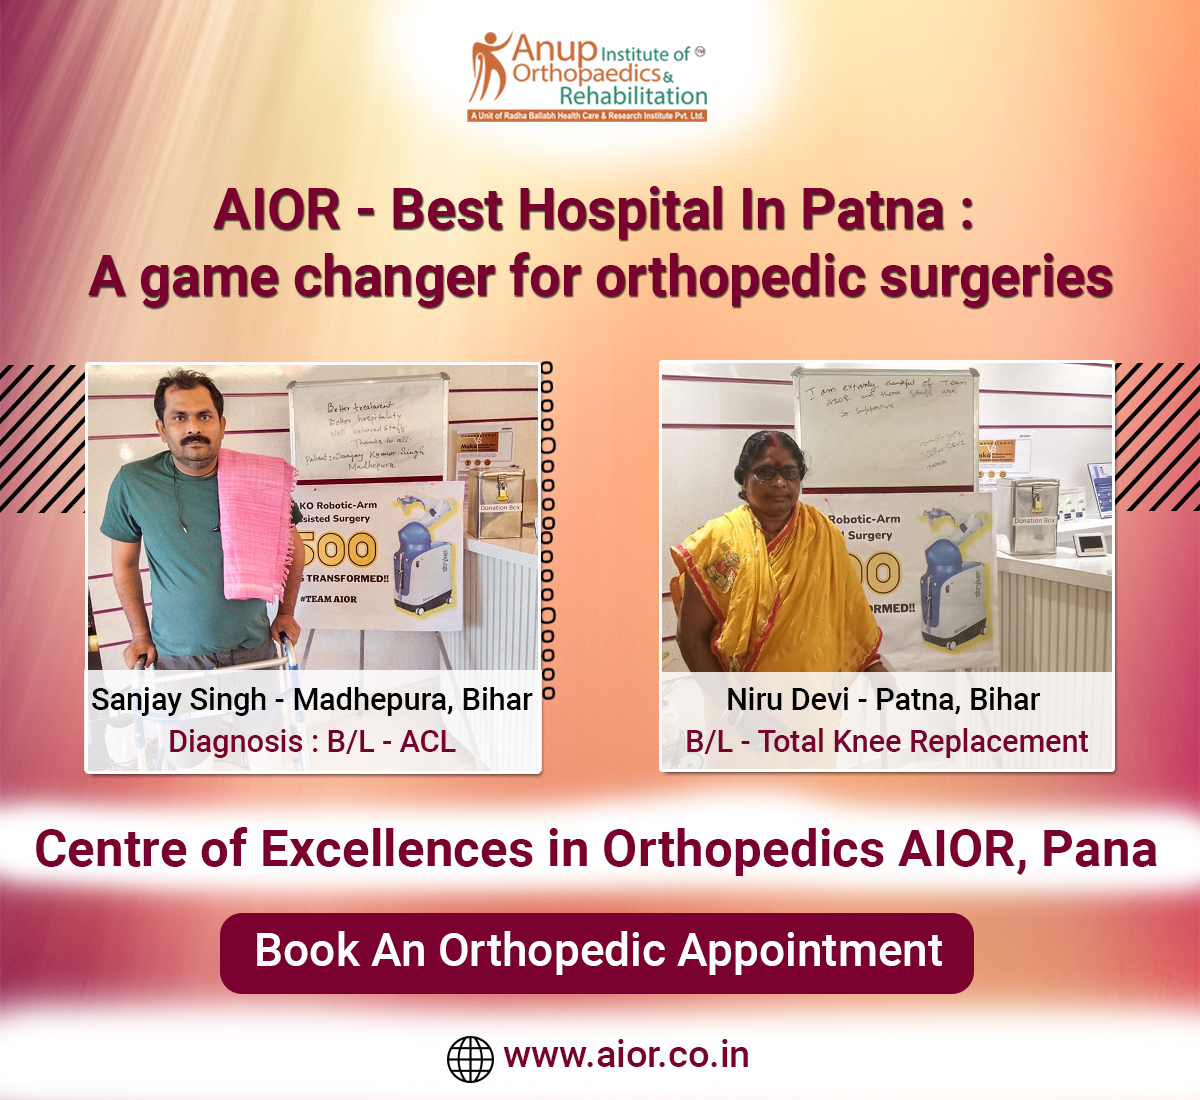 AIOR - Best Hospital In Patna : A game changer for orthopedic surgeries 

#aclsurgeryinpatna #kneereplacementsurgeryinpatna #totalkneereplacement #bestorthopedichospital #orthopedichospitalinpatna #kneereplacements  #kneereplacementsurgery #totalhipreplacement